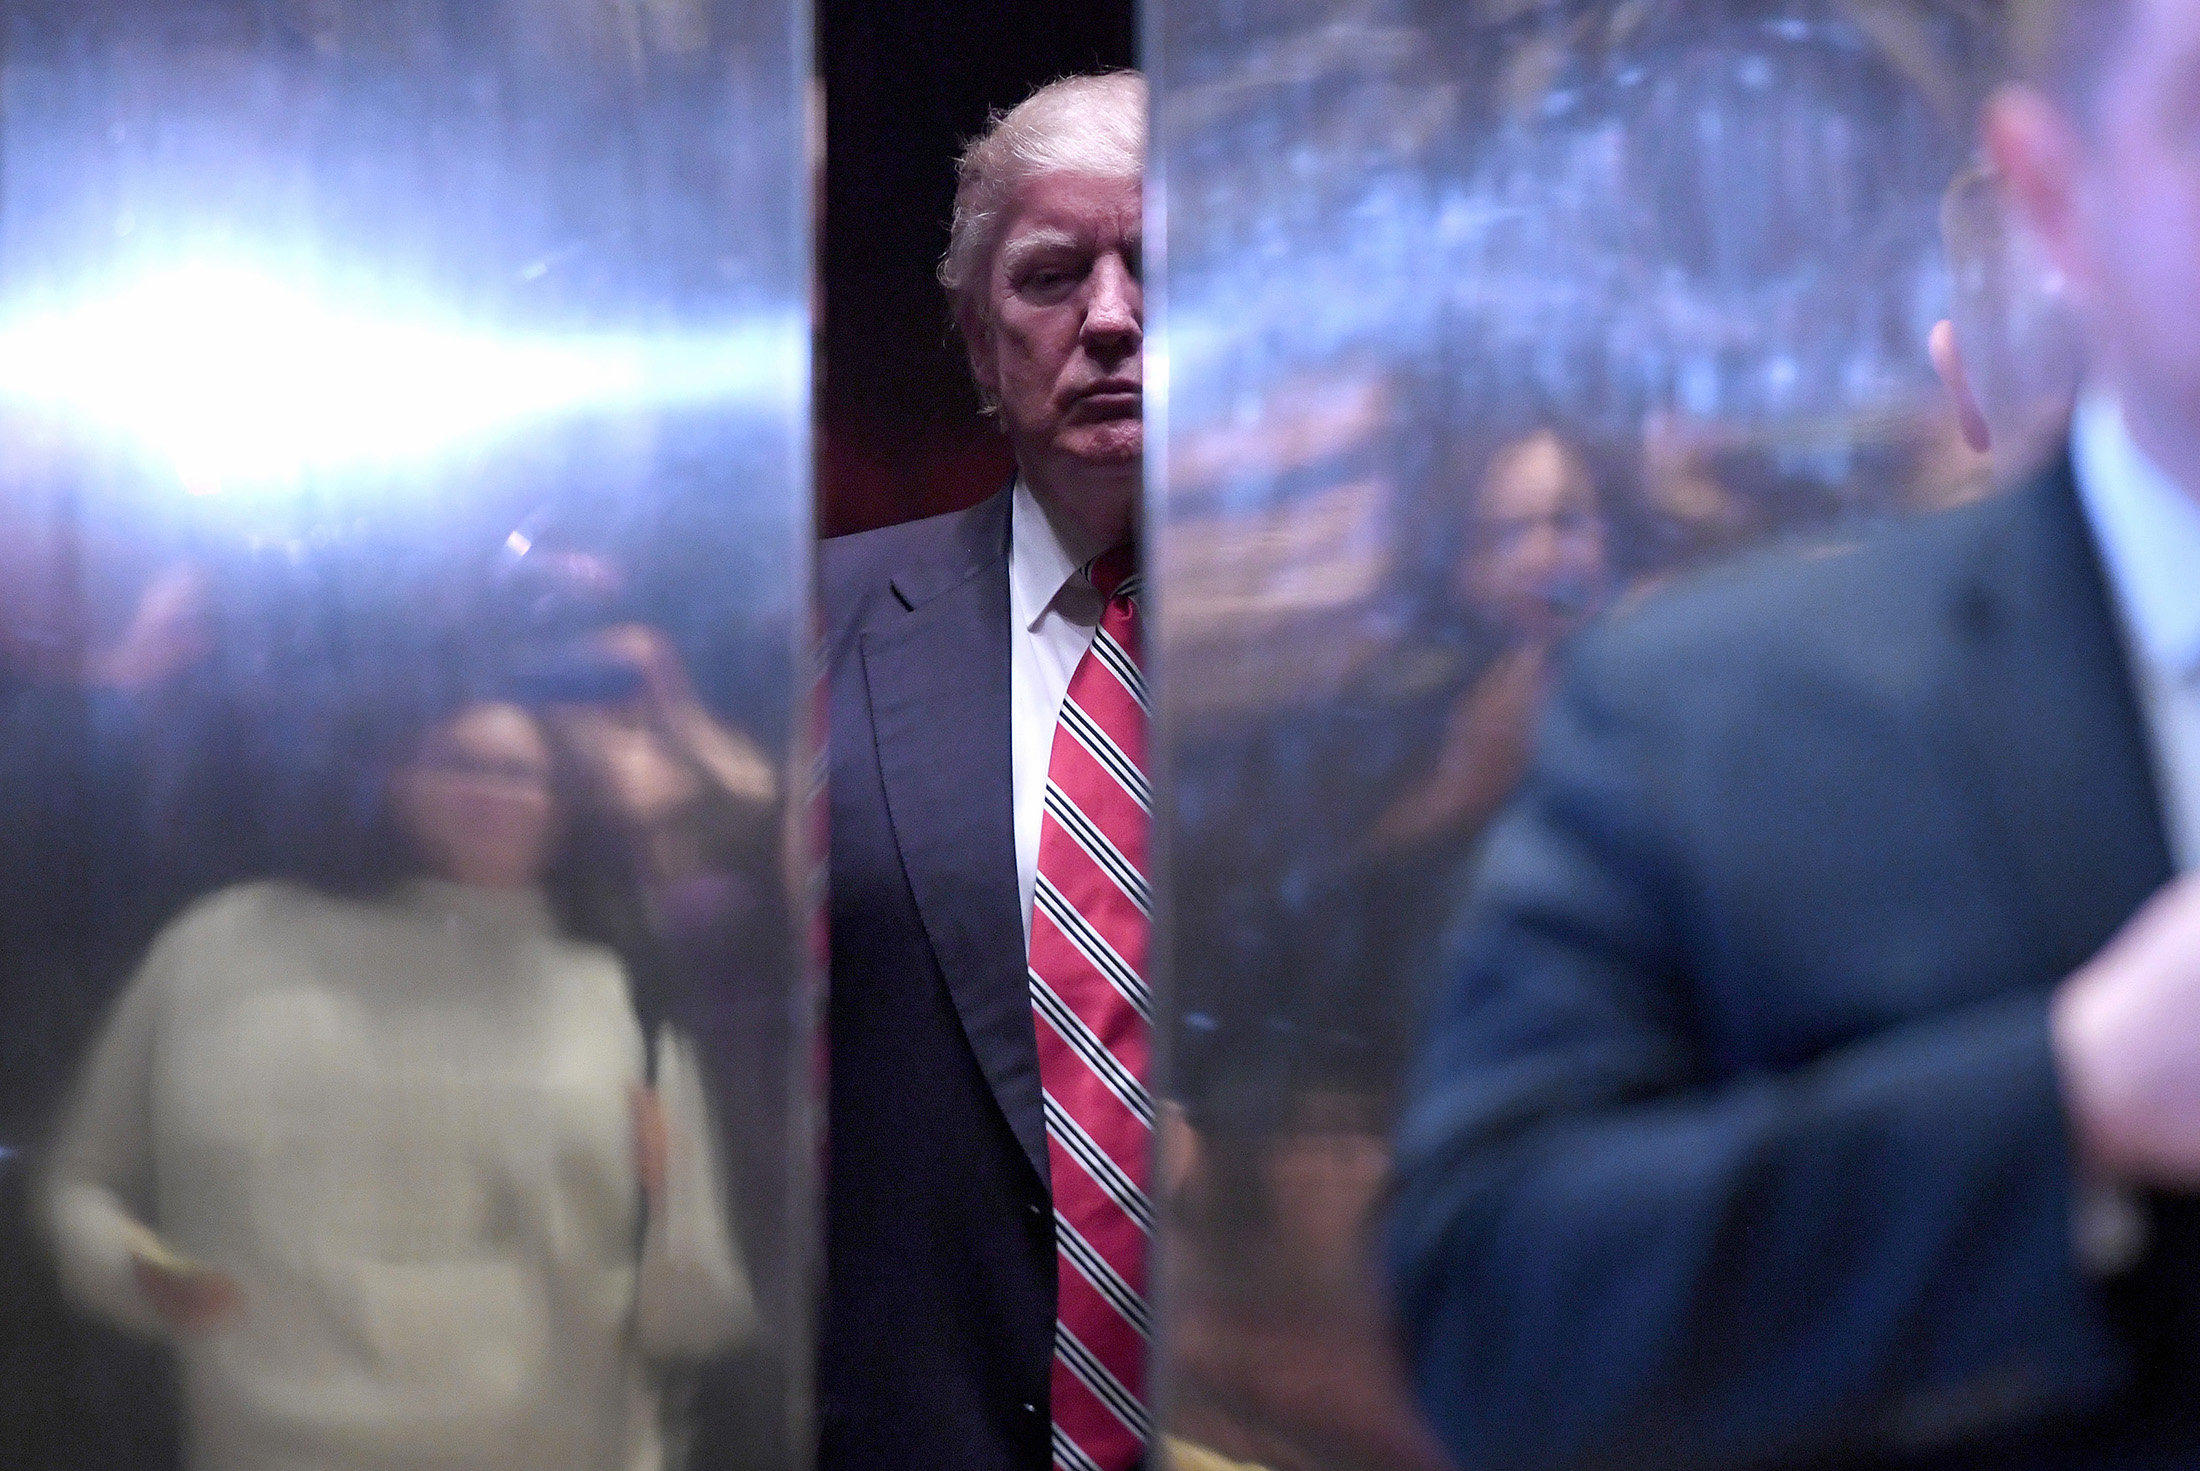 Donald Trump, center, waits in an elevator in the lobby of Trump Tower in New York, on Jan. 16, 2017.
